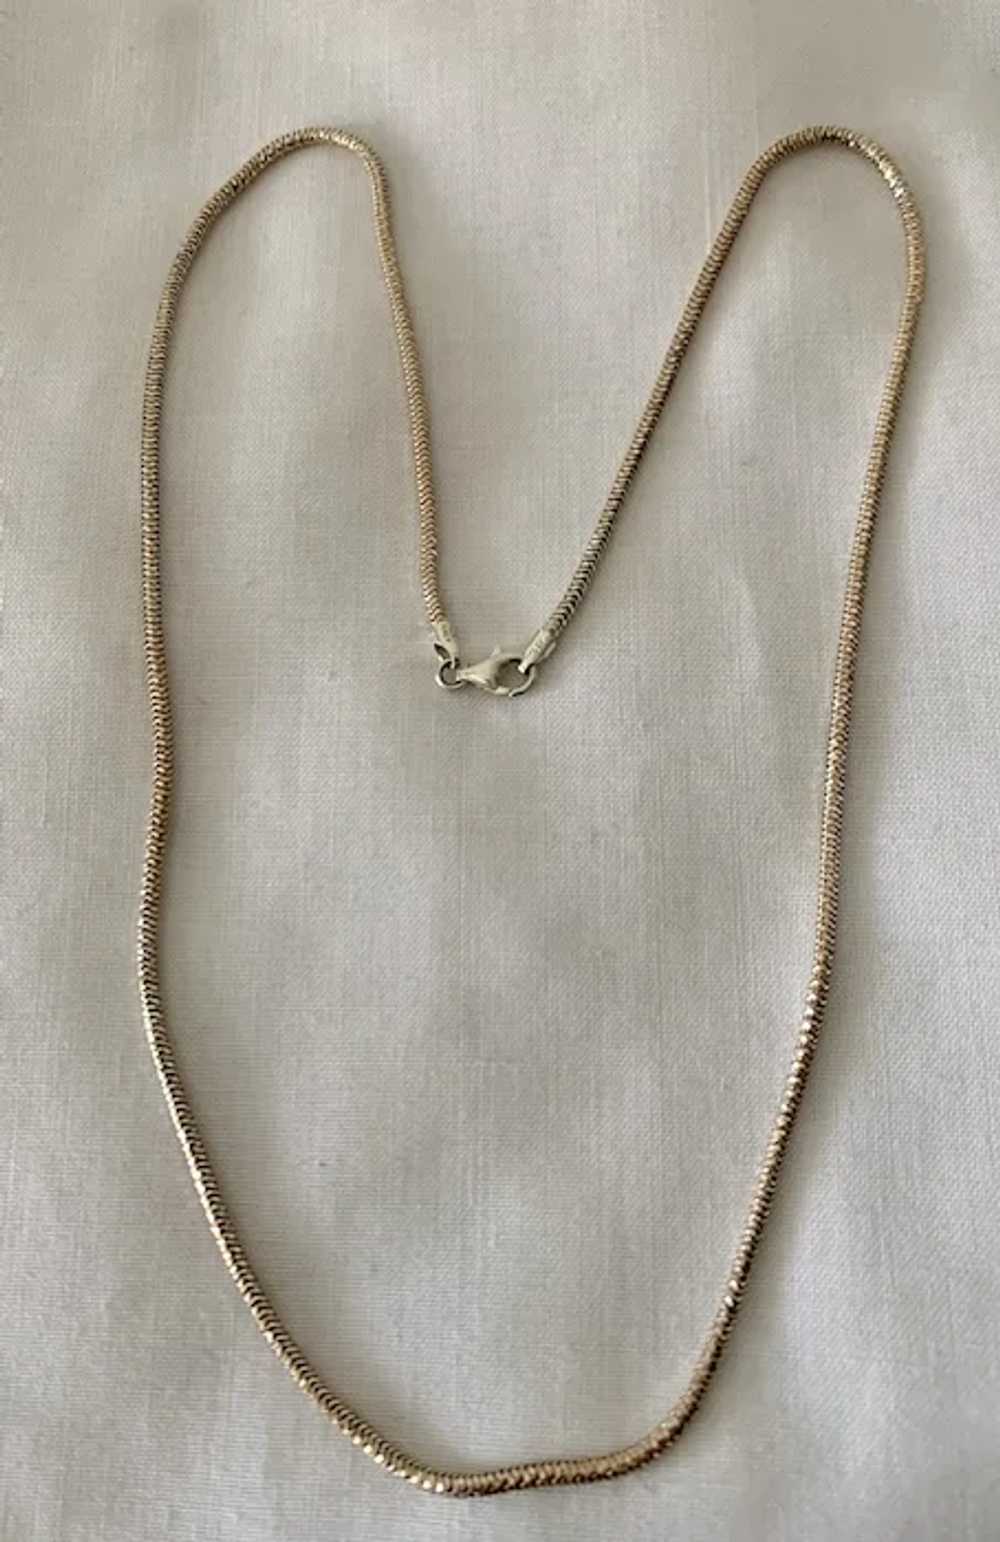 Very Pretty Sterling Chain Necklace - Slightly Go… - image 6